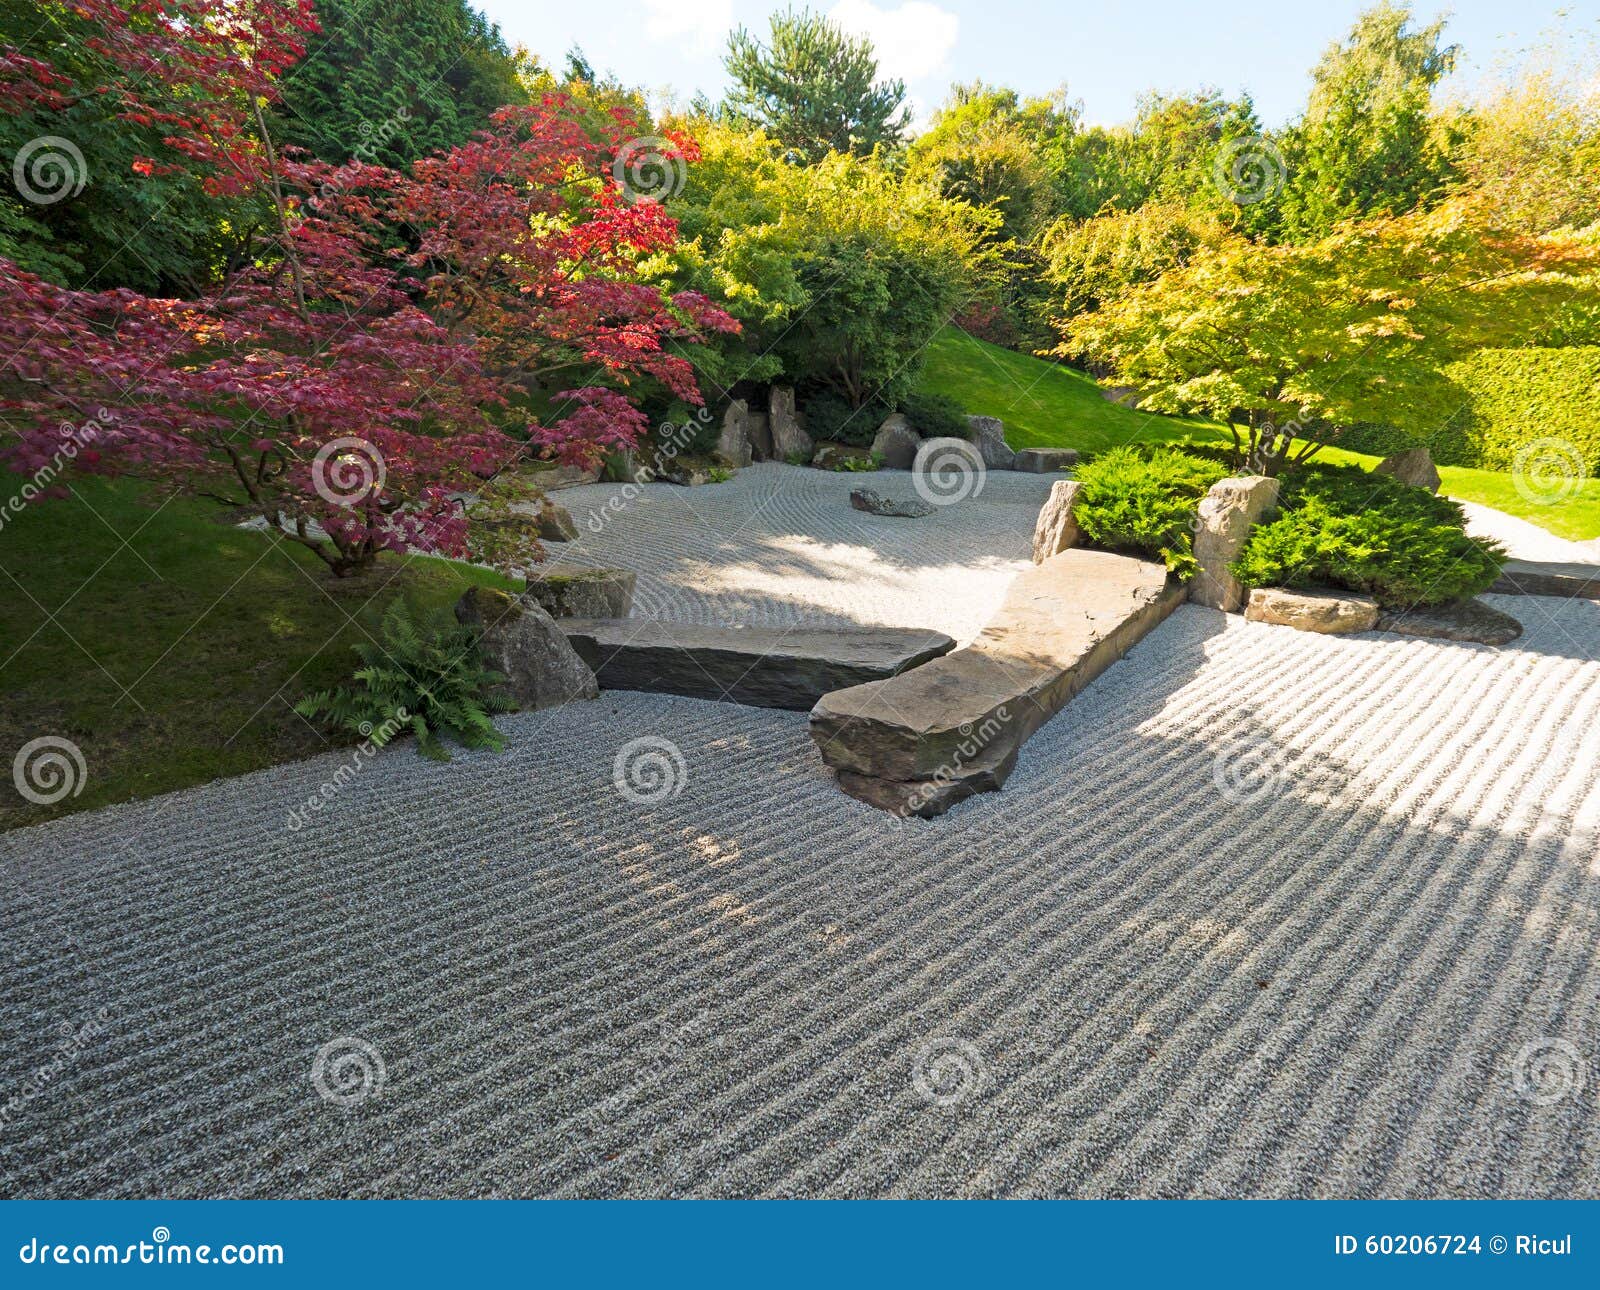 Japanese rock garden stock photo. Image of horticulture - 60206724